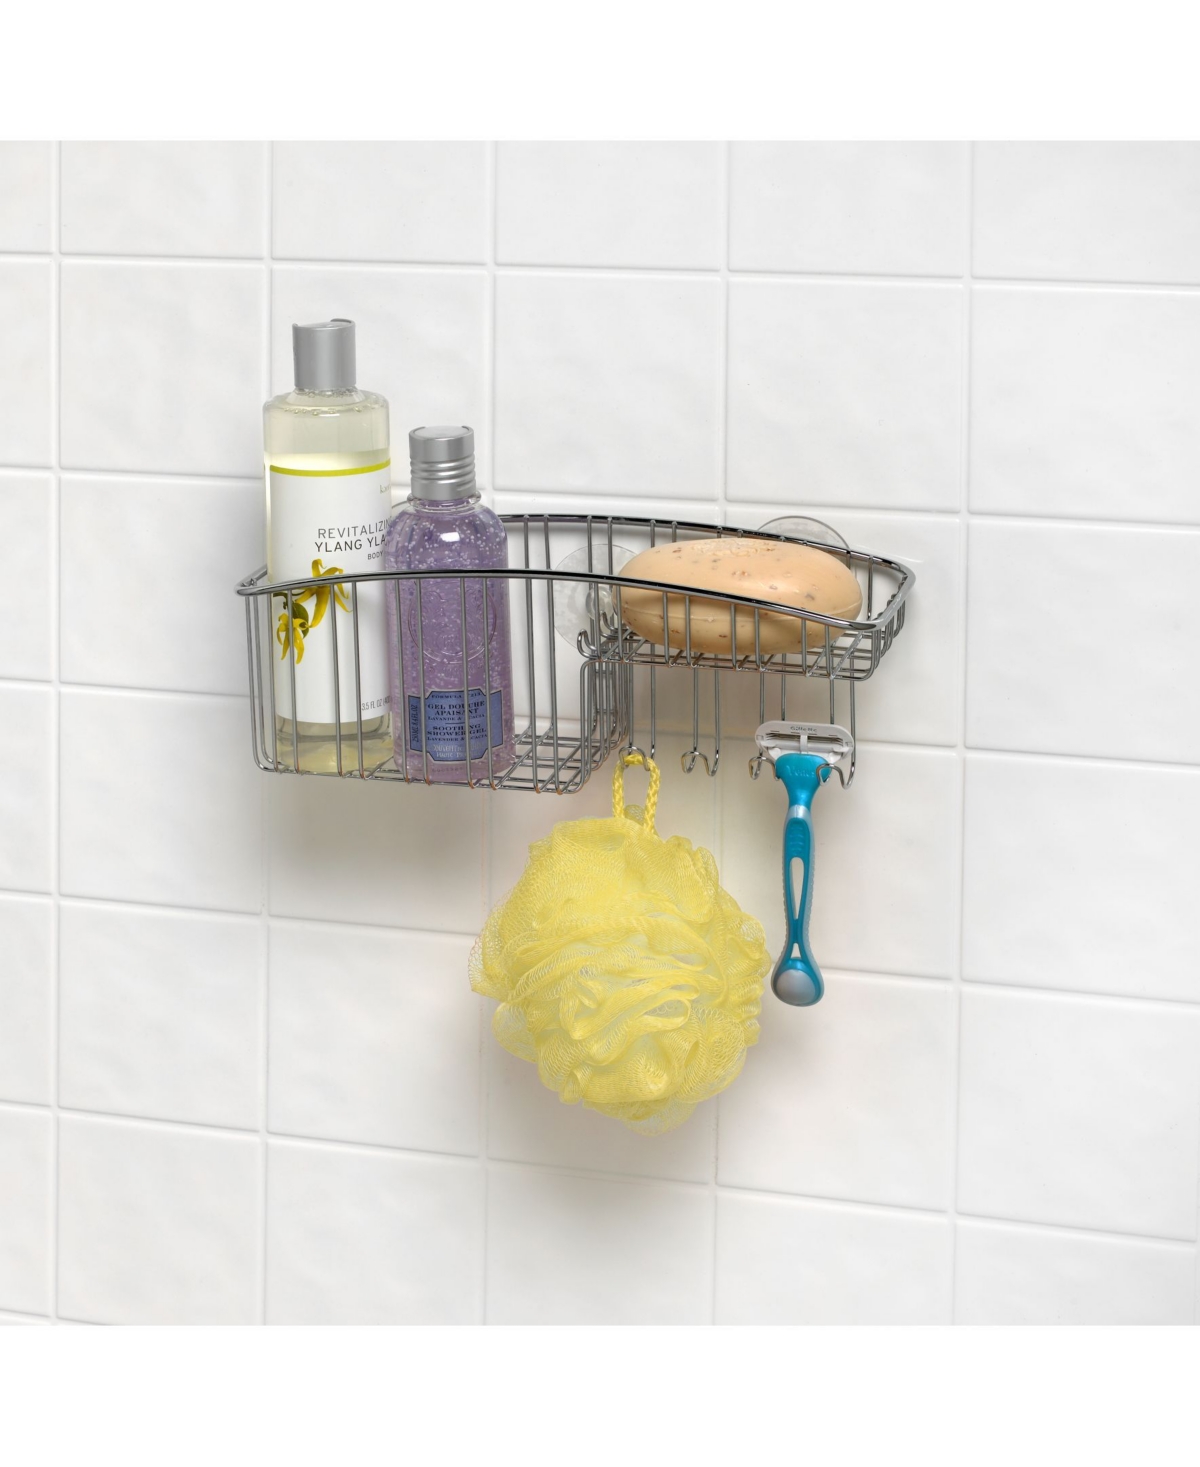 Contempo Suction Shower Basket with Hooks - Silver